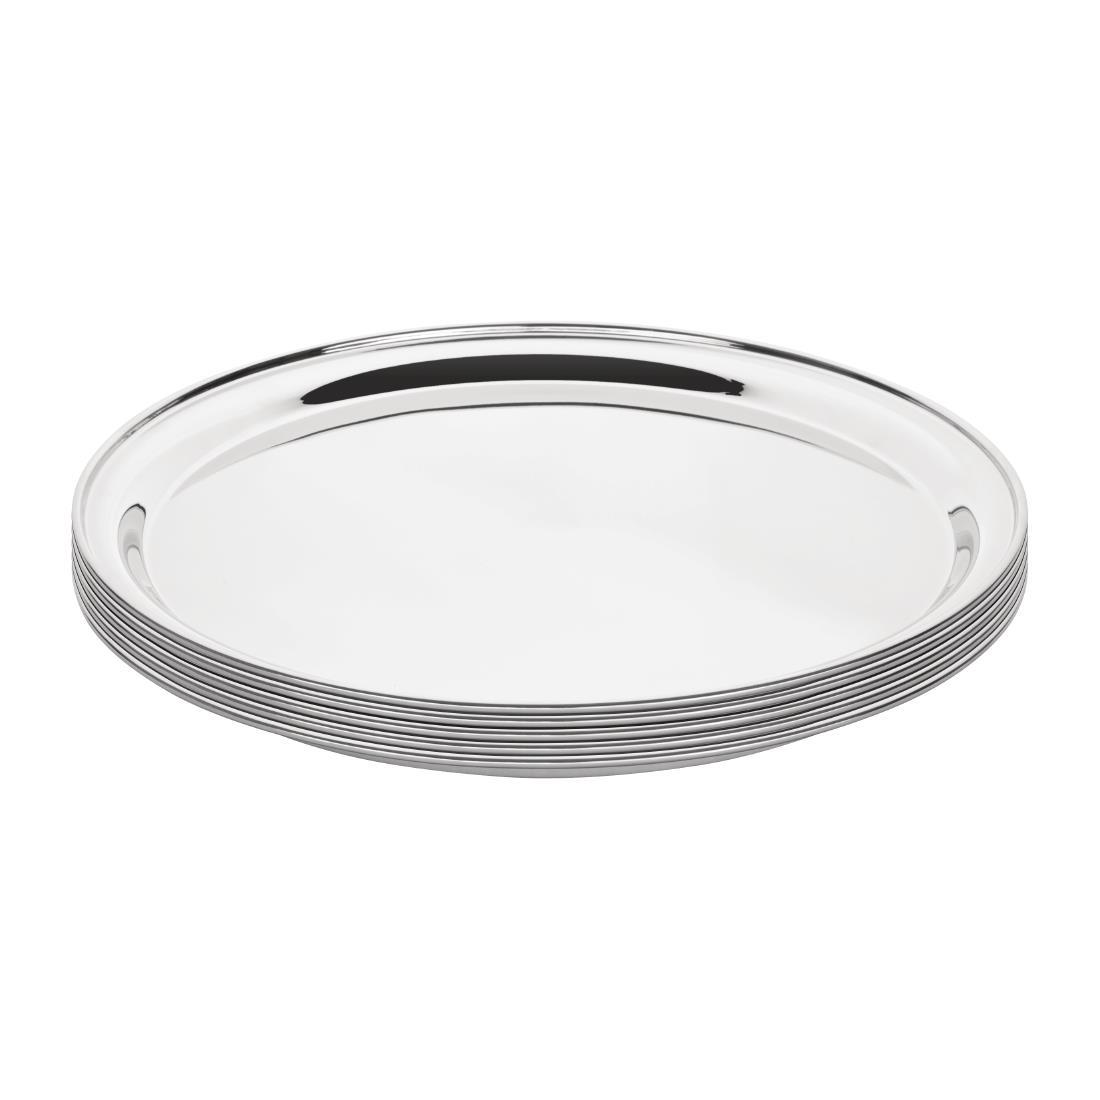 Olympia Stainless Steel Round Service Tray 305mm - J828  - 2